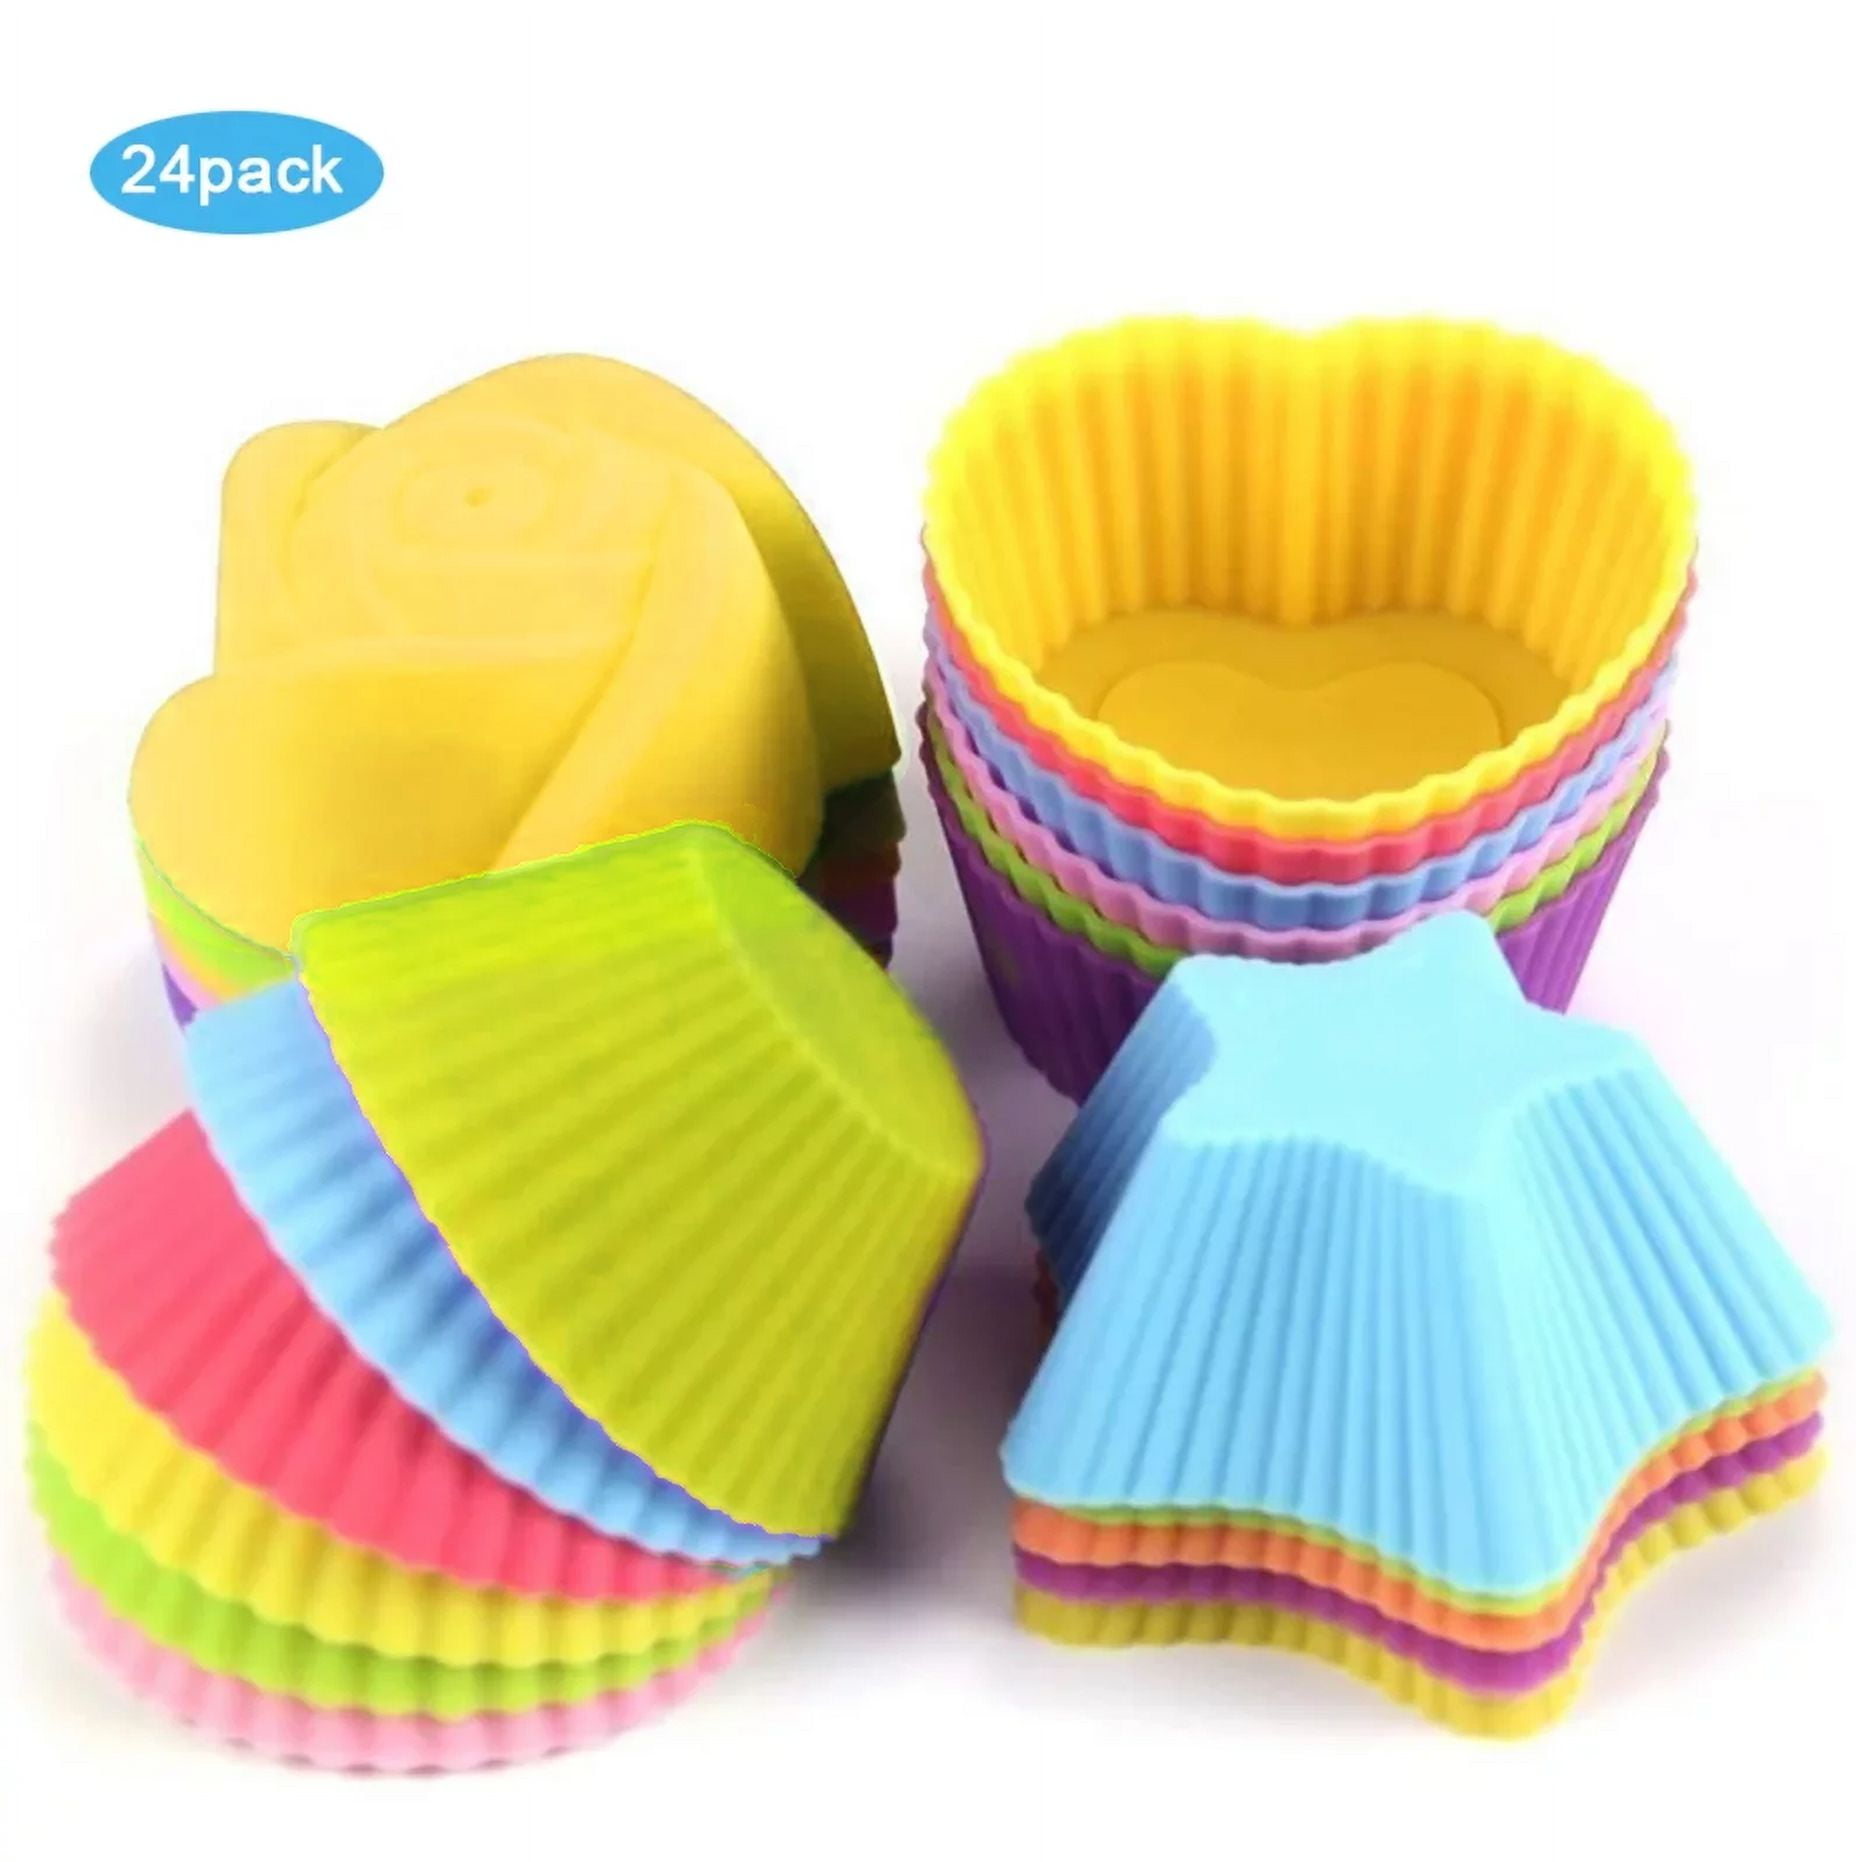 42 Pack Silicone Cupcake Baking Cups Multi Flower-Shaped Silicone Cupcake  Molds